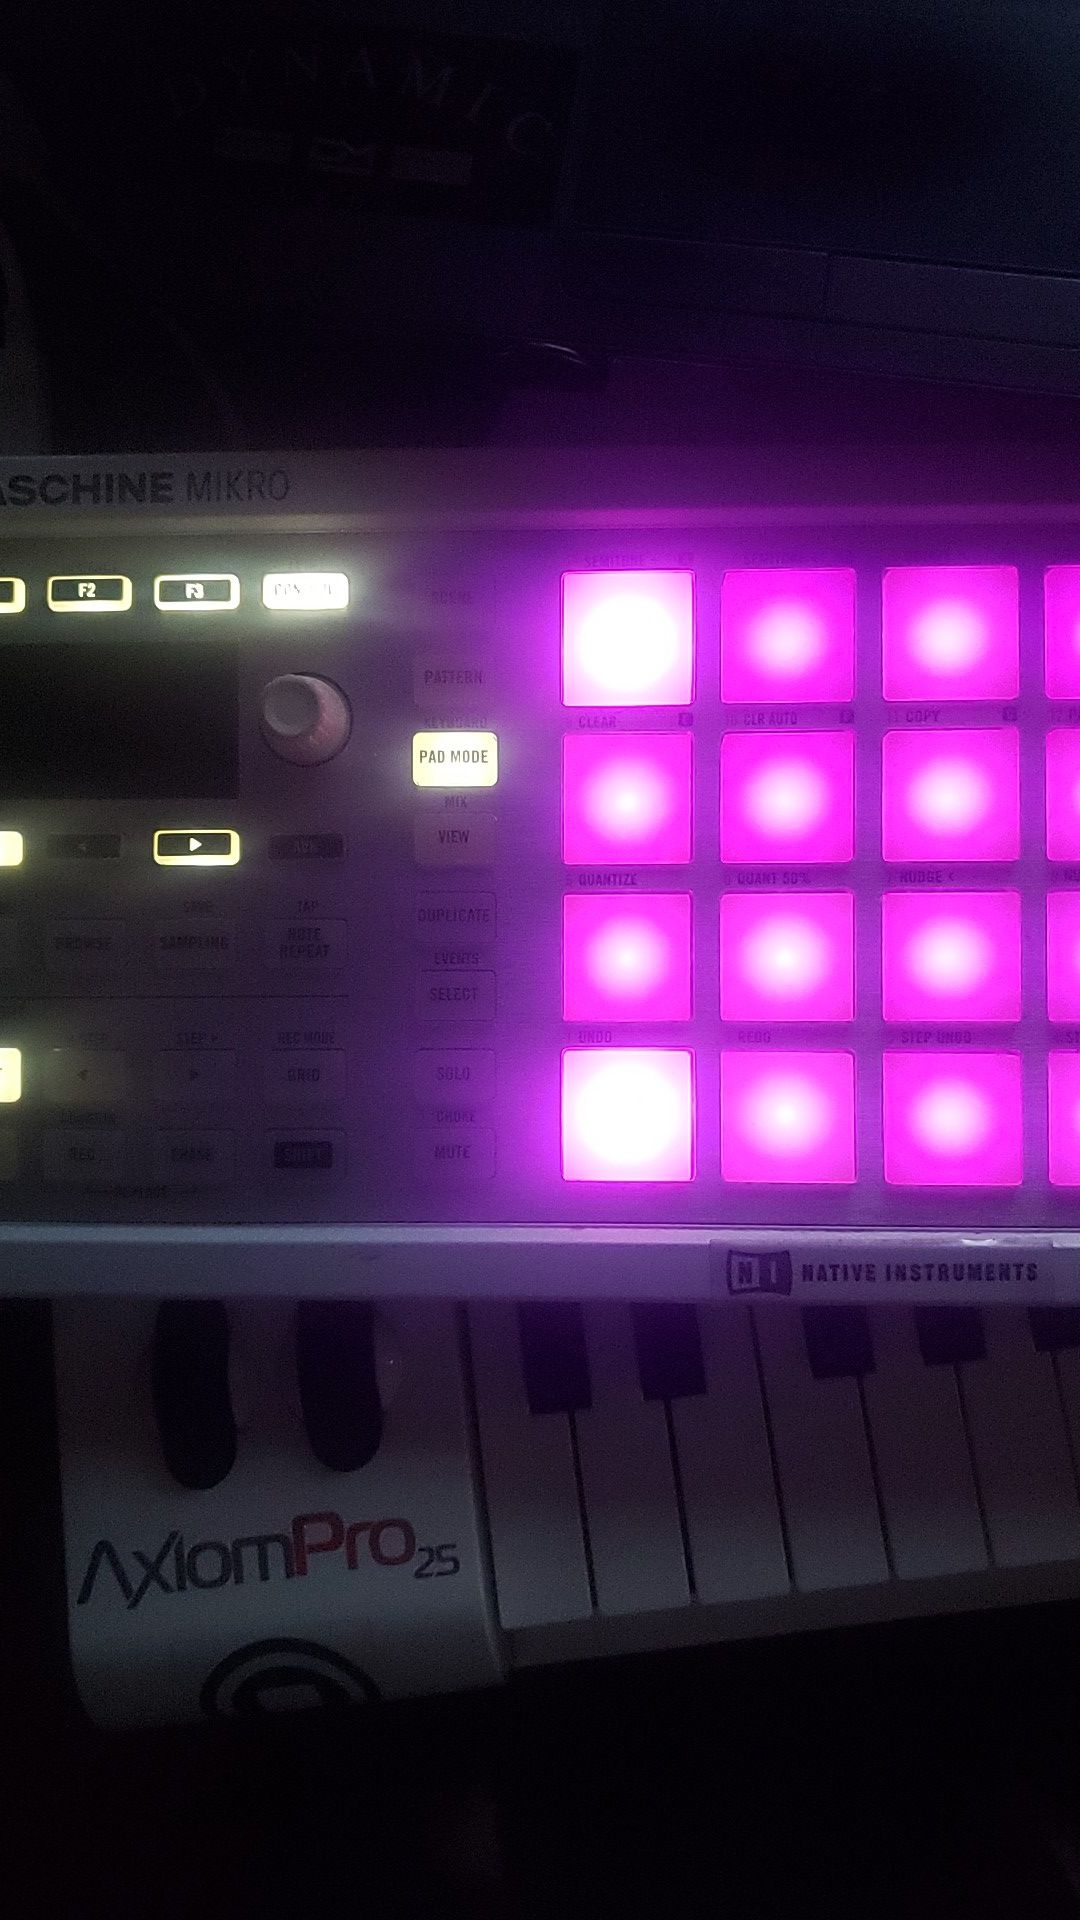 MASCHINE MIKRO MK 2$20 with WITH SOFTWARE JUST needs new screen $30